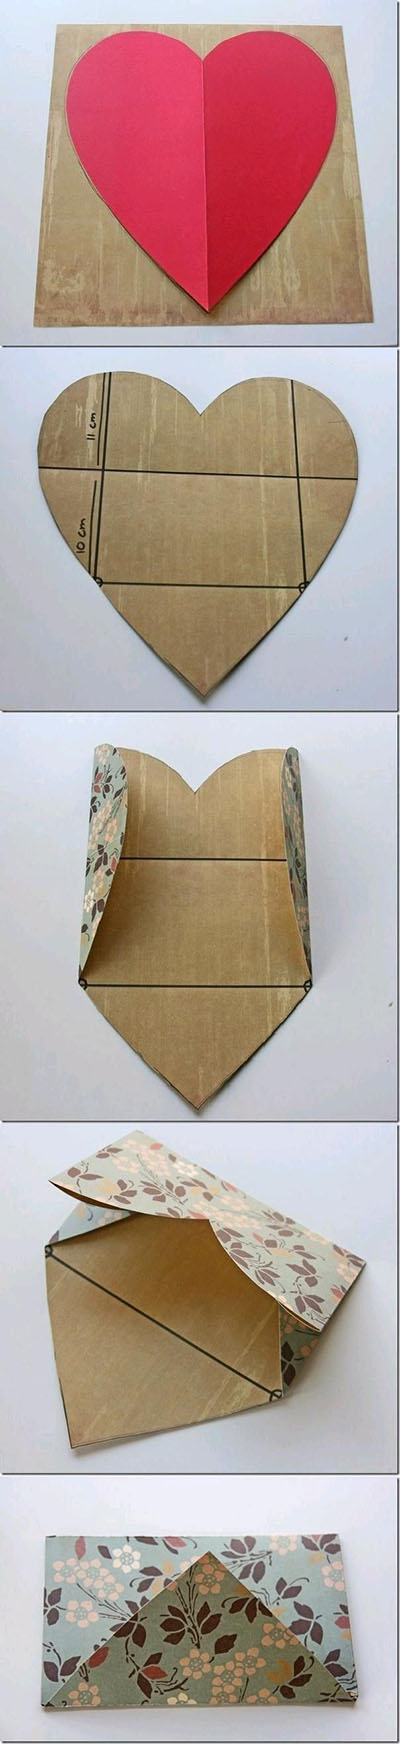 10 DIY Envelope from a Heart bfbb1e